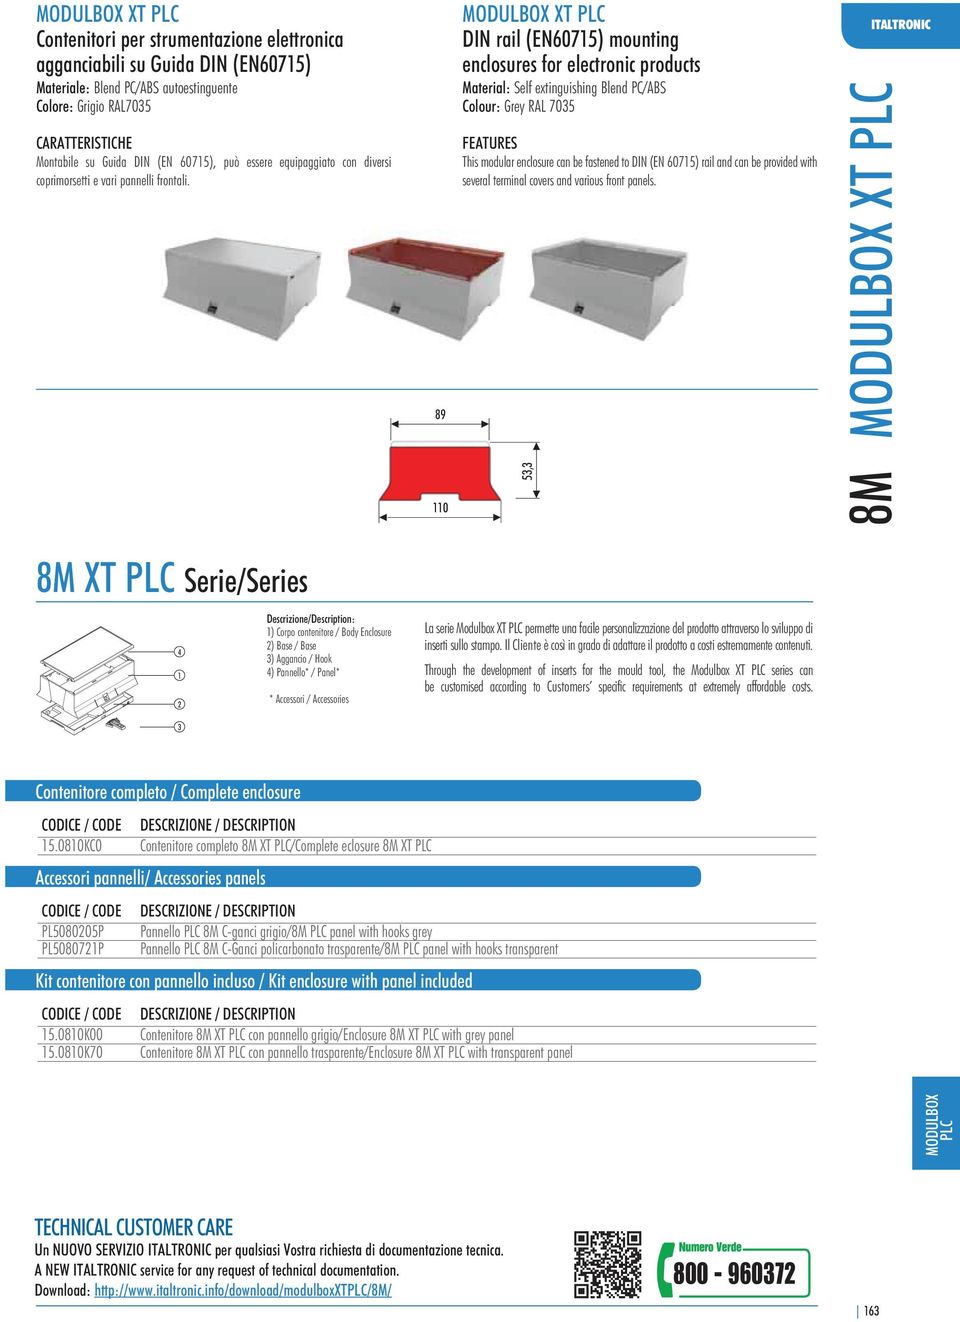 89 DIN rail (EN60715) mounting enclosures for electronic products Material: Self extinguishing Blend PC/ABS FEATURES This modular enclosure can be fastened to DIN (EN 60715) rail and can be provided